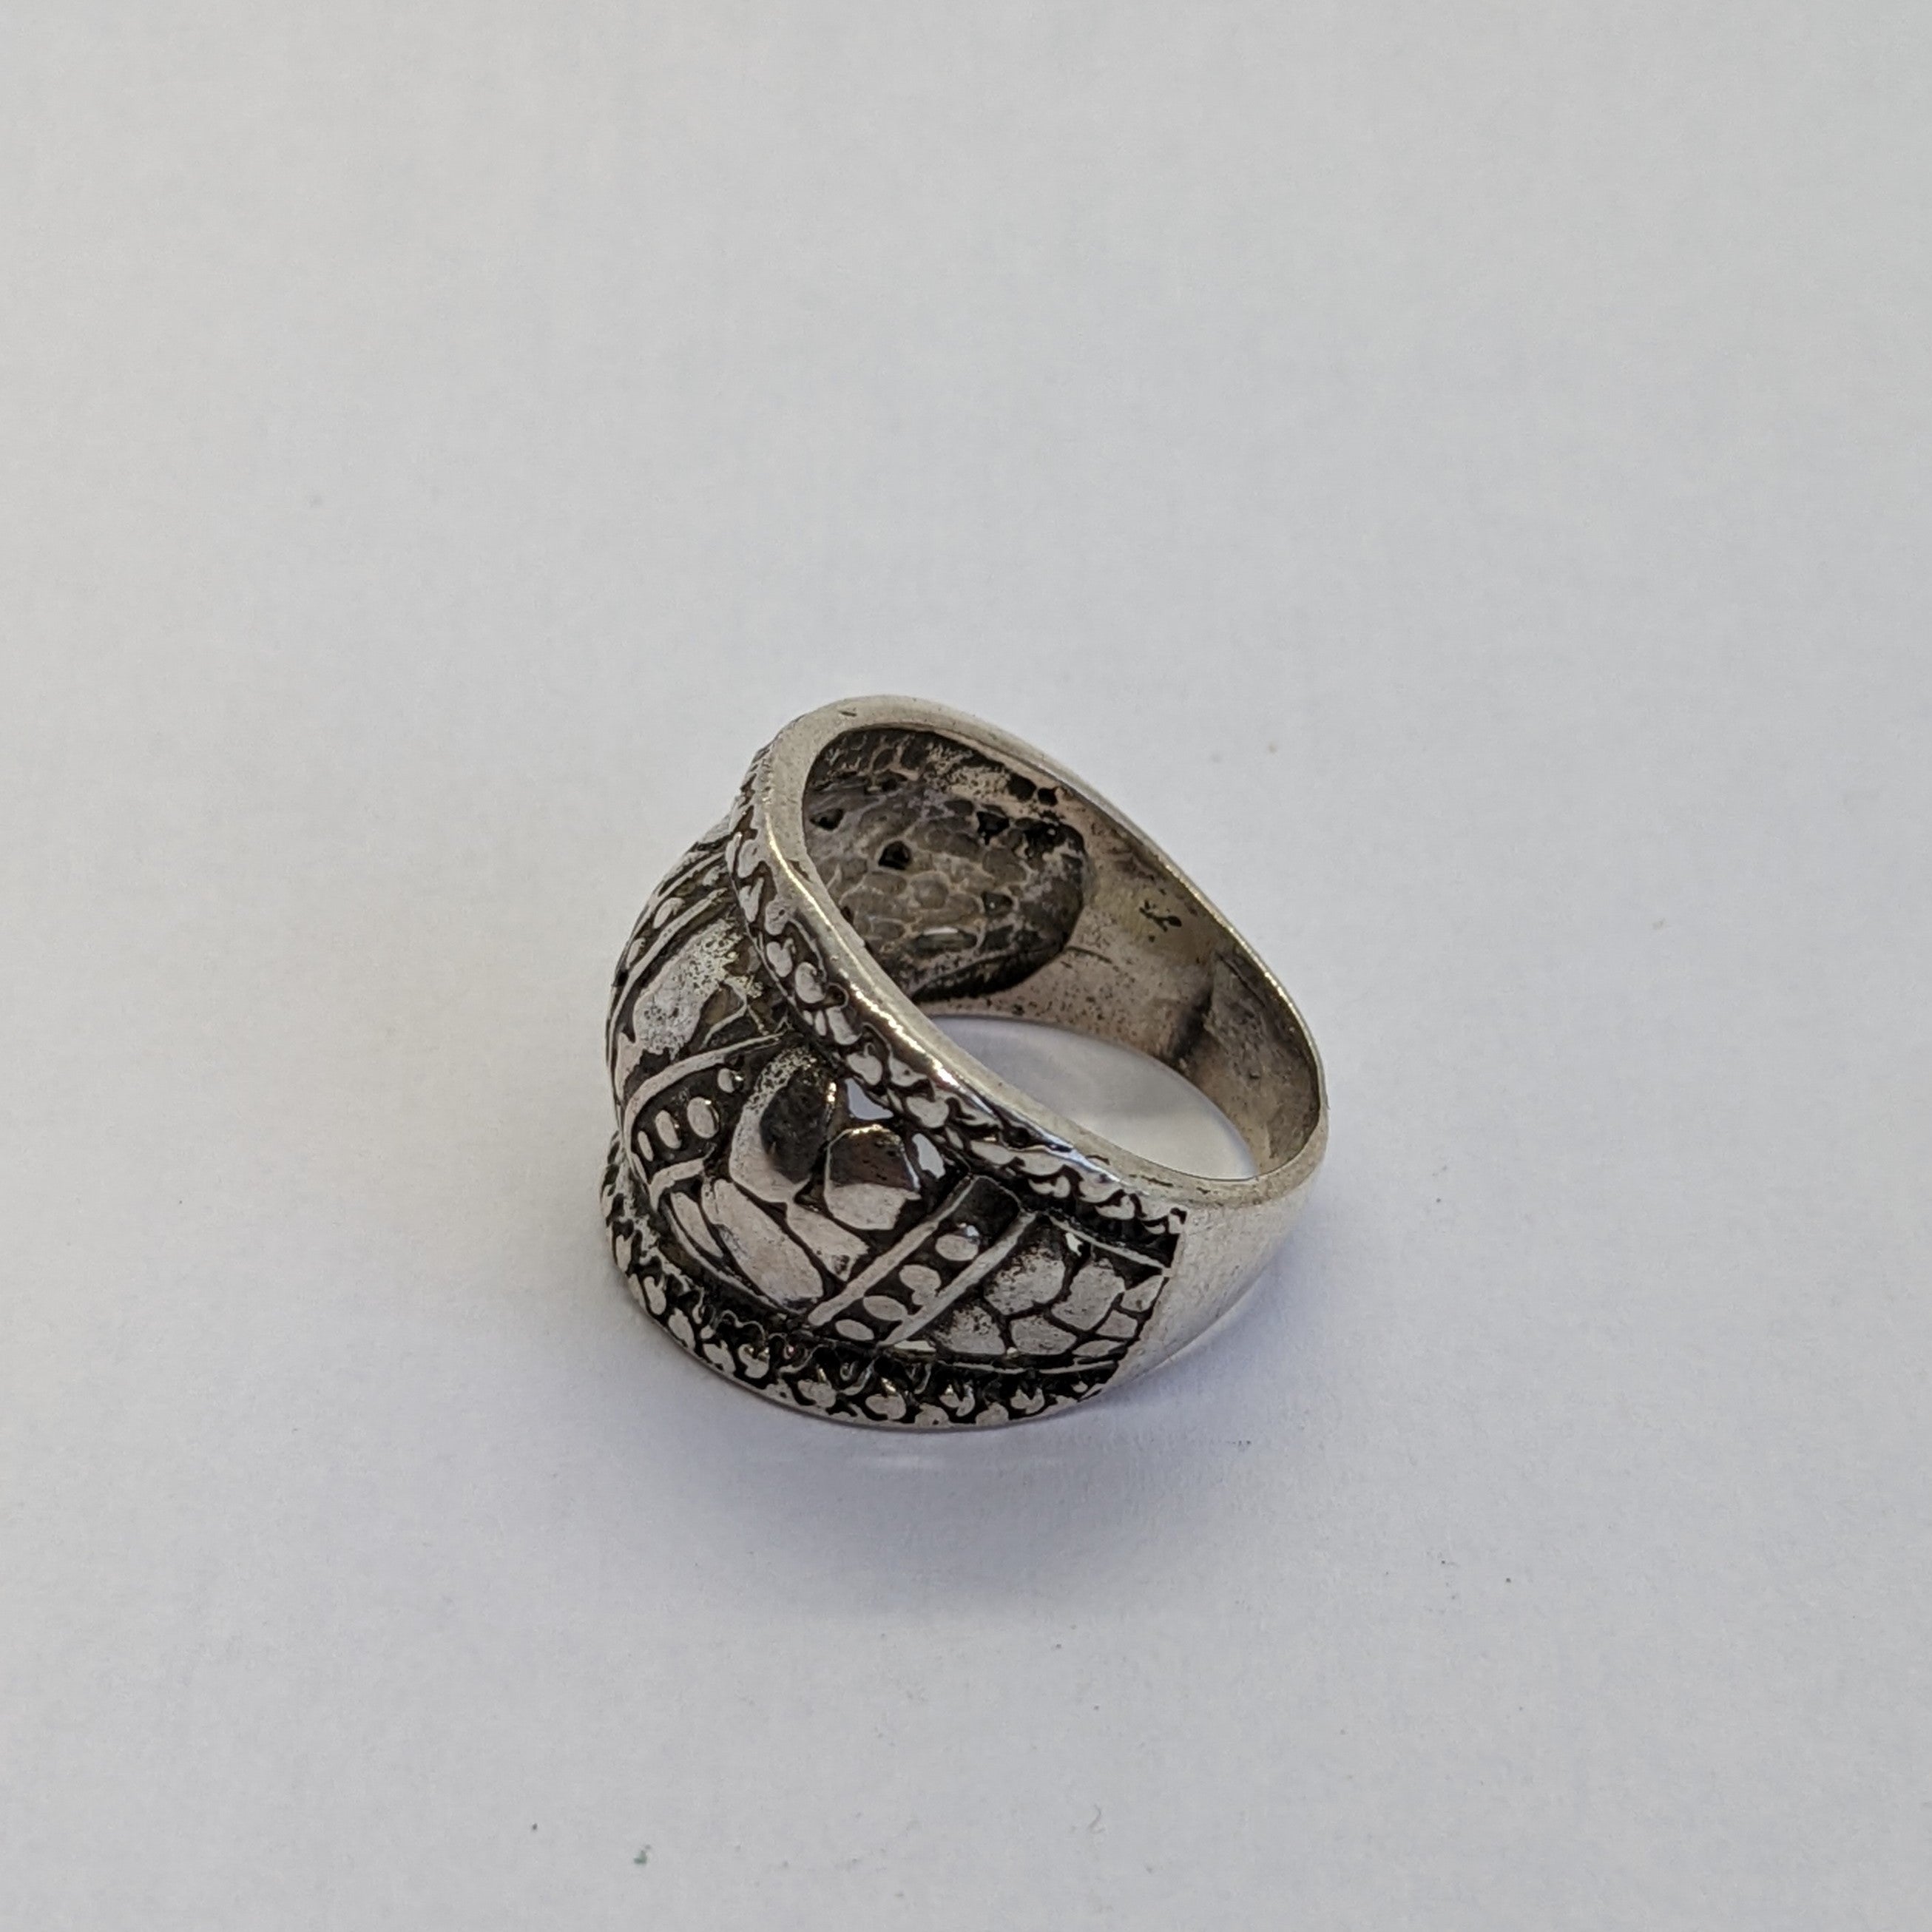 Rugged Scale Ring Size 8 Vintage Design